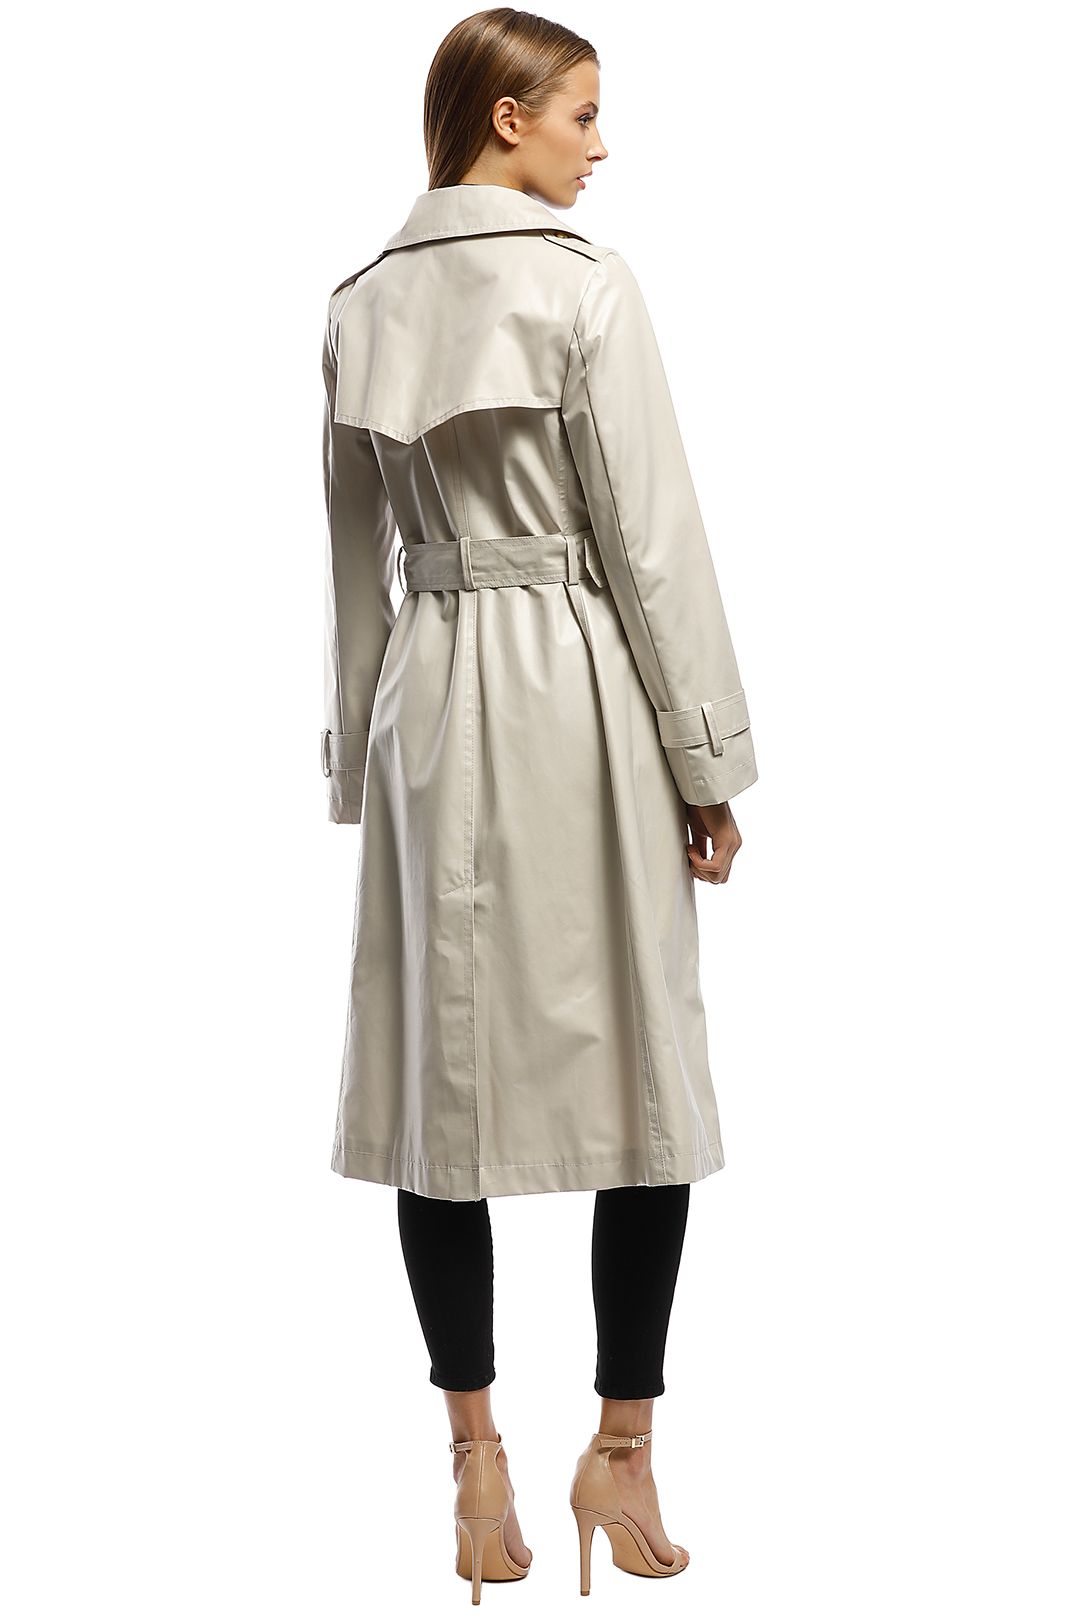 Moss-and-Spy-Poirot-Trench-Beige- Back